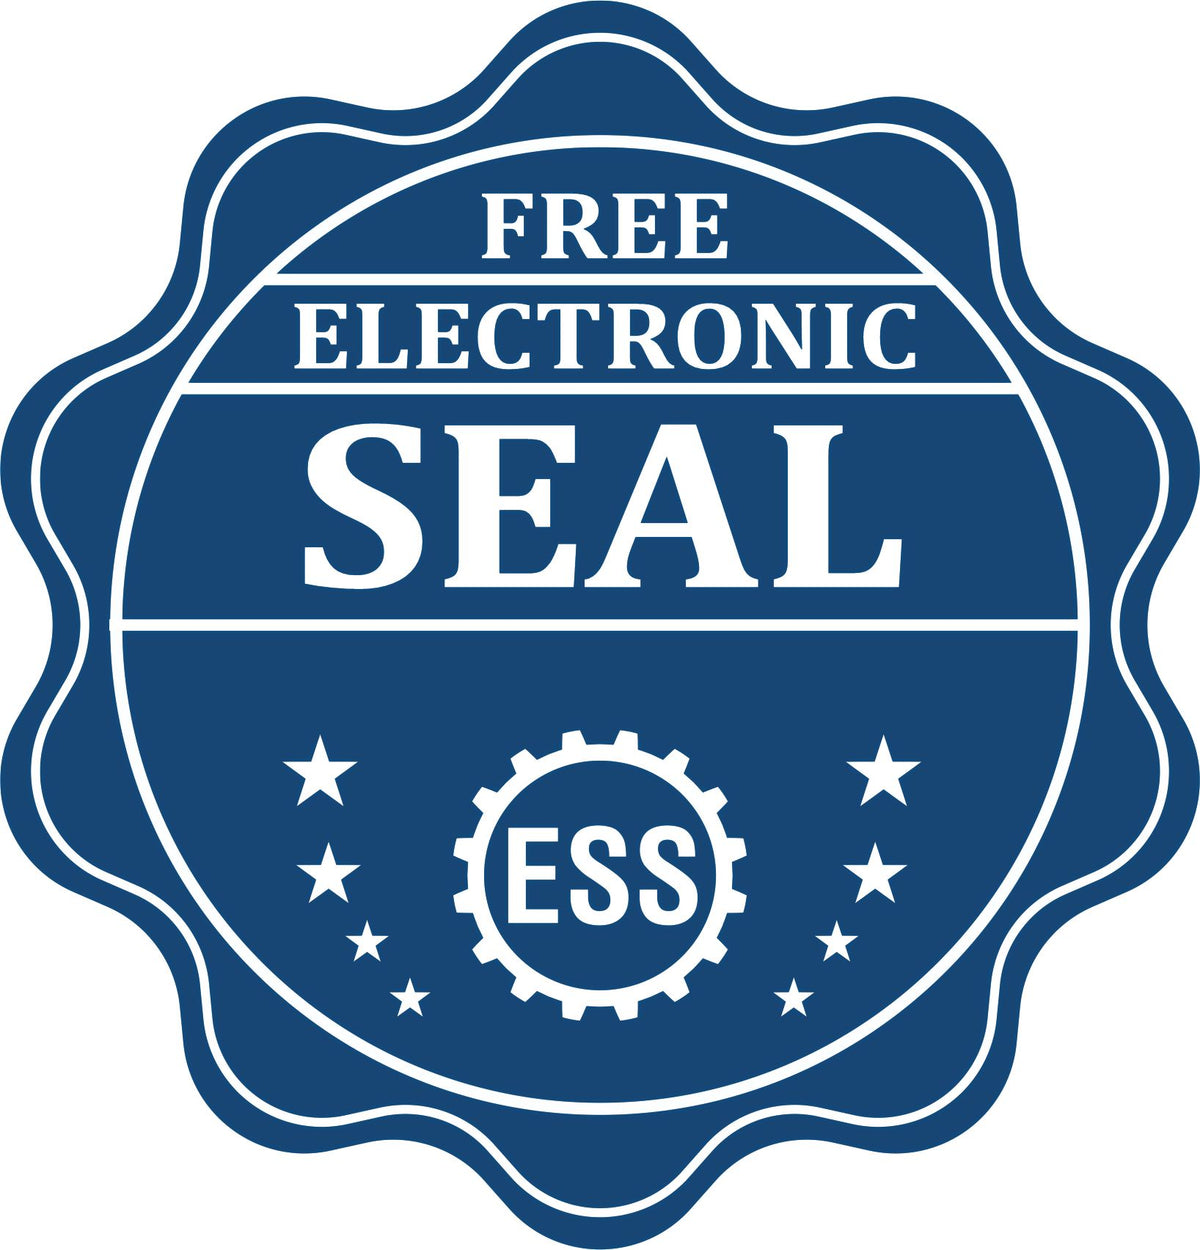 A badge showing a free electronic seal for the Slim Pre-Inked Arkansas Landscape Architect Seal Stamp with stars and the ESS gear on the emblem.